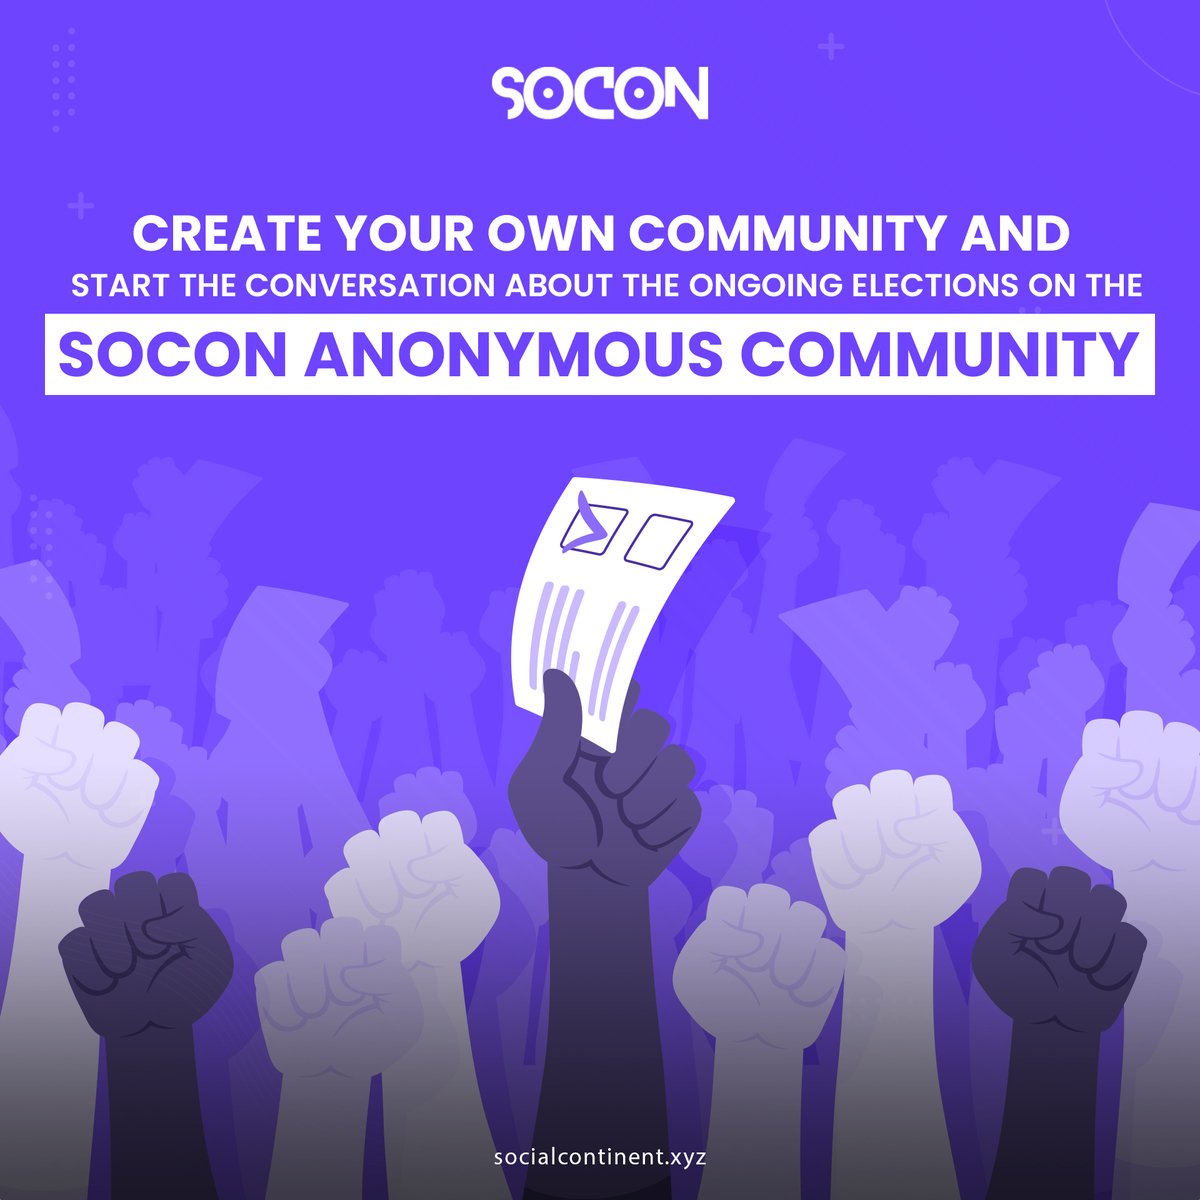 Let's ignite the discussion!🔥 Join our community on SOCON Anonymous and dive into the hot topic of ongoing elections. Your voice matters, so let's hear what you have to say about shaping the future through the ballot box. 🗳

#Election2024 #VotingDay #India #Voted